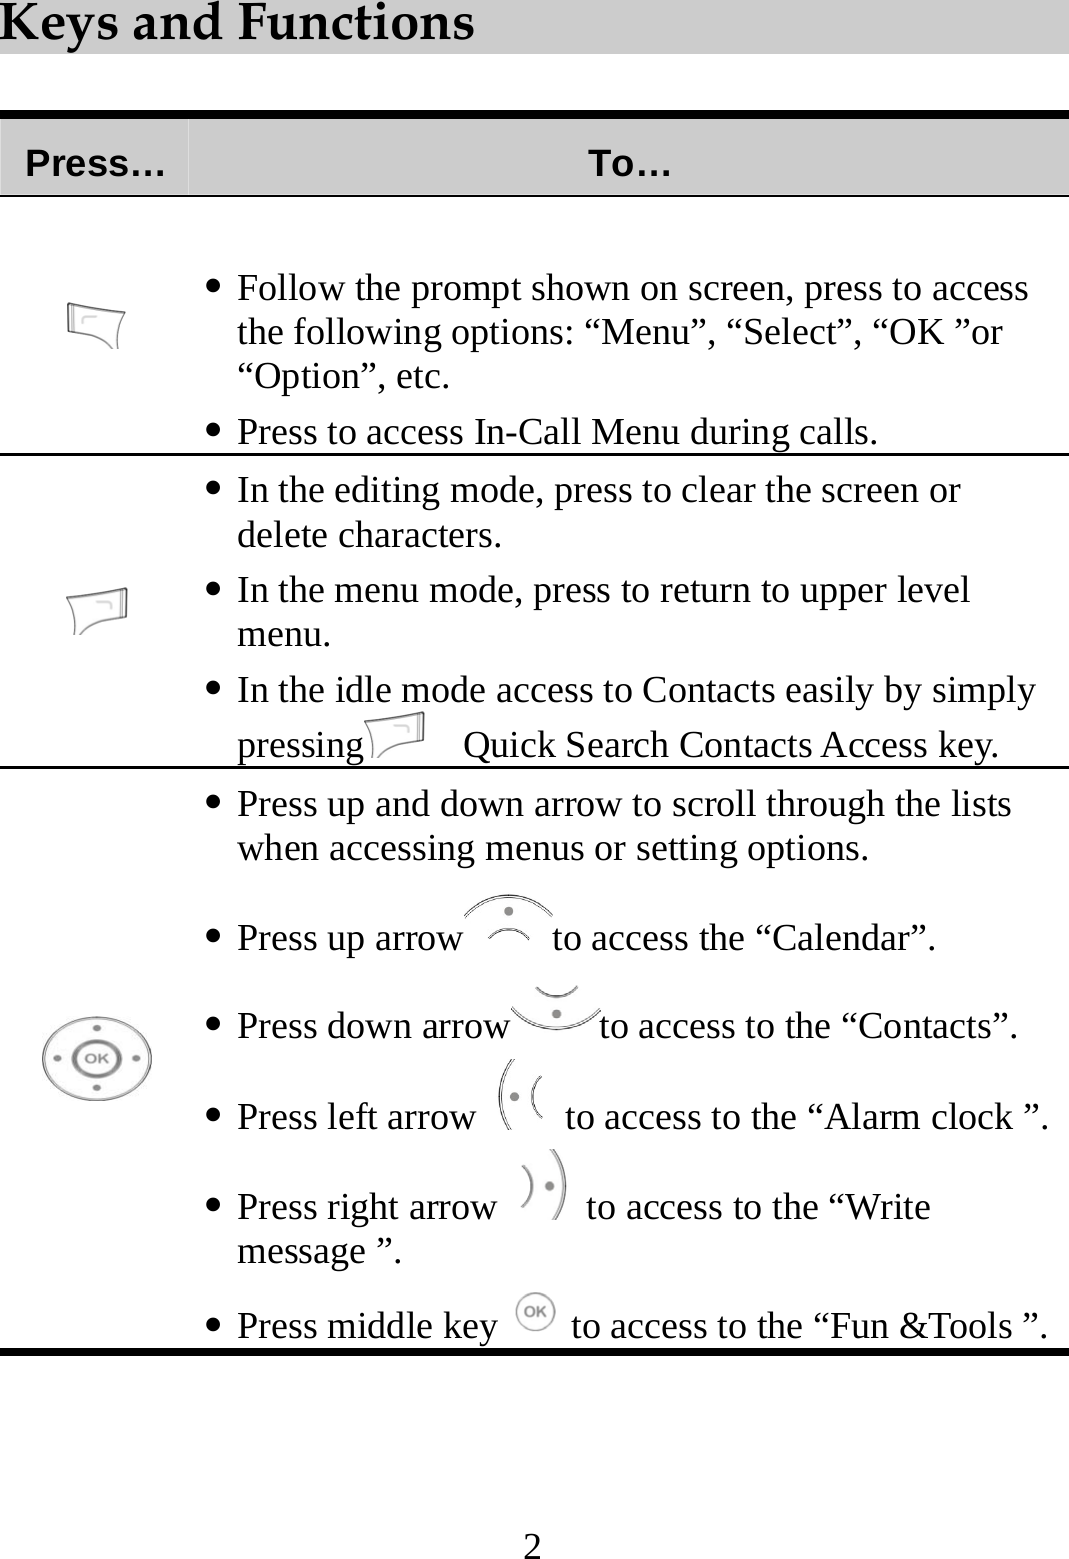  2 Keys and Functions  Press…  To…    Follow the prompt shown on screen, press to access the following options: “Menu”, “Select”, “OK ”or “Option”, etc.  Press to access In-Call Menu during calls.   In the editing mode, press to clear the screen or delete characters.  In the menu mode, press to return to upper level menu.  In the idle mode access to Contacts easily by simply pressing     Quick Search Contacts Access key.   Press up and down arrow to scroll through the lists when accessing menus or setting options.  Press up arrow to access the “Calendar”.  Press down arrow to access to the “Contacts”.  Press left arrow to access to the “Alarm clock ”. Press right arrow to access to the “Write message ”.  Press middle key to access to the “Fun &amp;Tools ”.